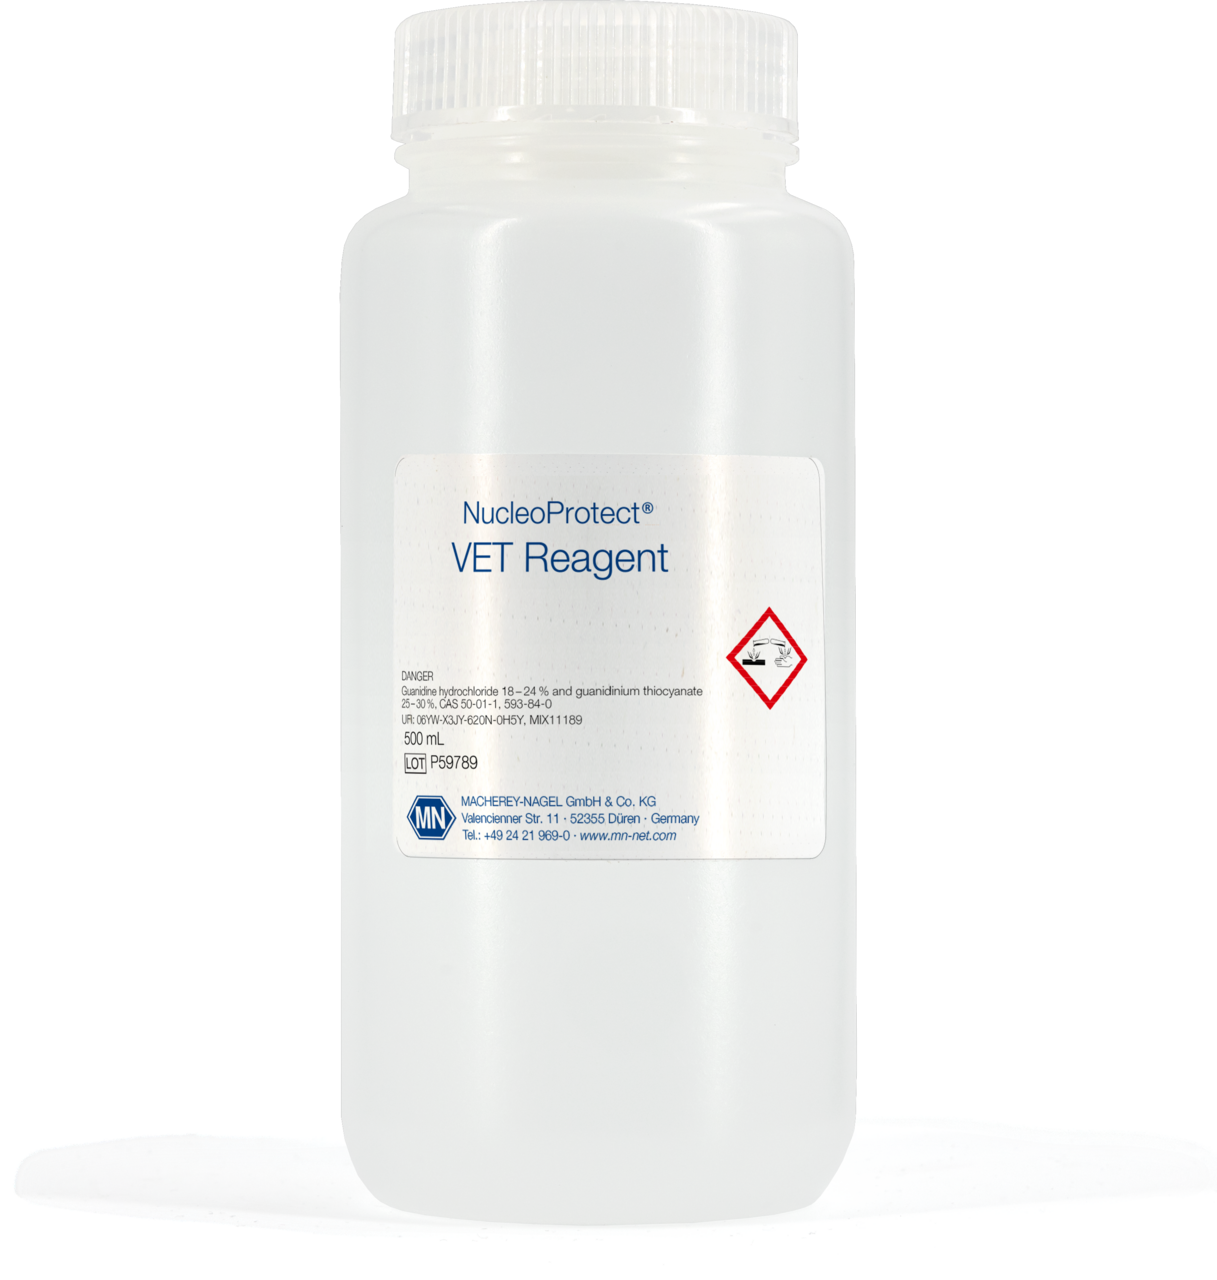 NucleoProtect VET Reagent, DNA / RNA stabilization and sample inactivation